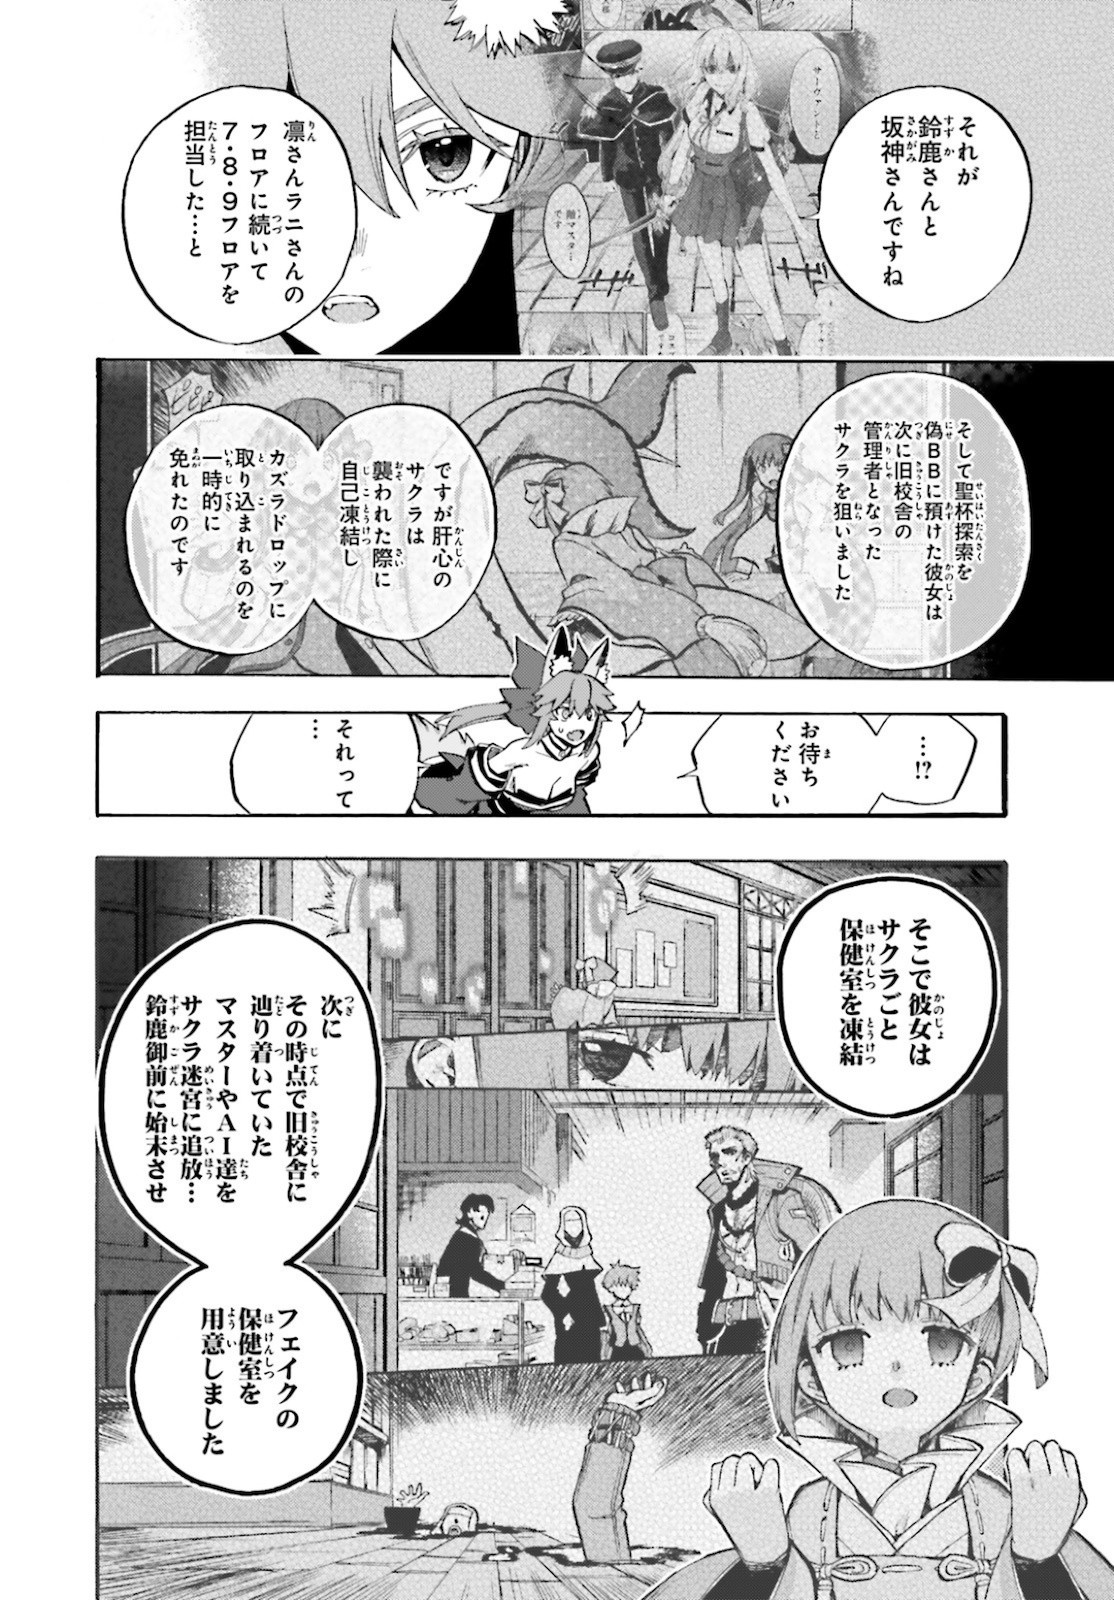 Fate Extra Ccc Fox Tail Chapter 65 Page 2 Raw Sen Manga